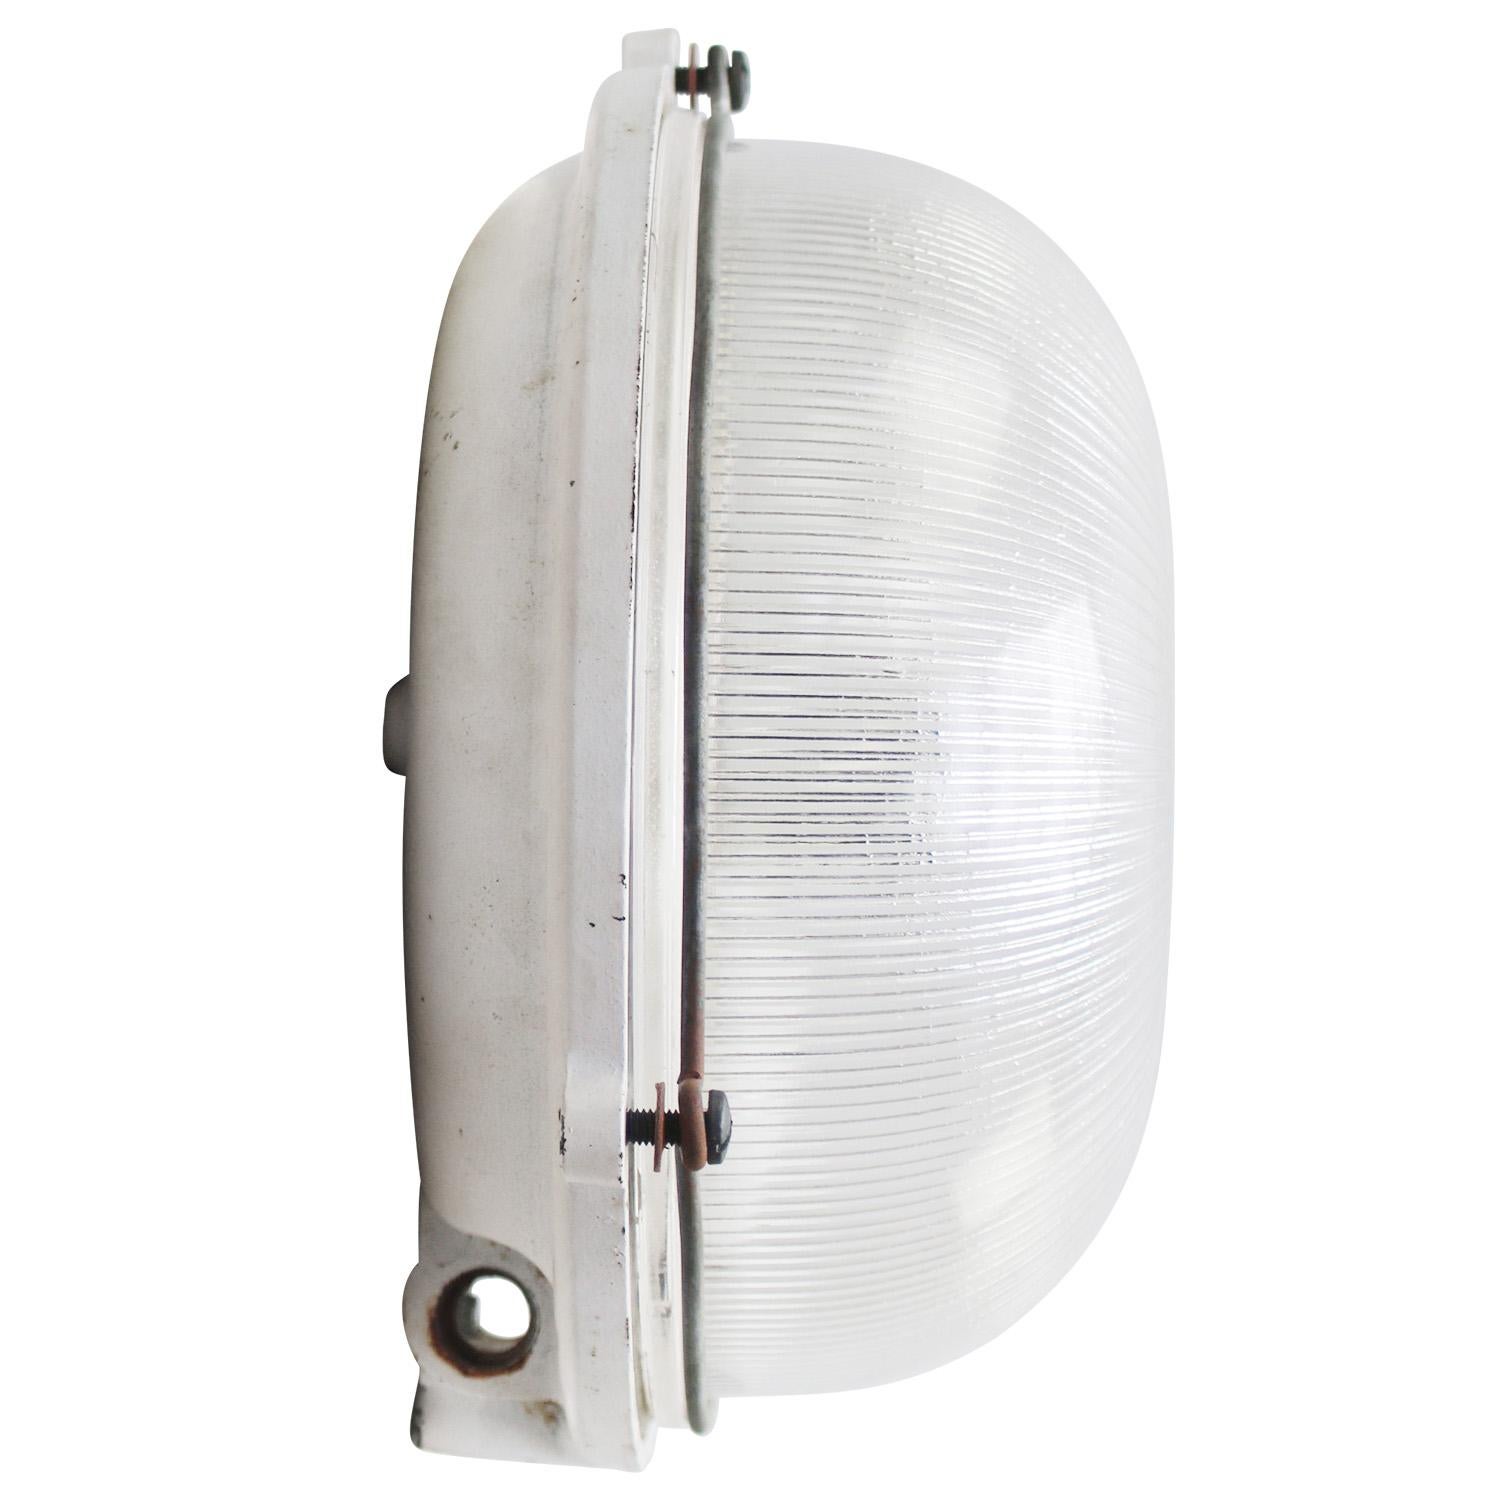 French Industrial wall / ceiling lamp by Mapelec, Amiens, France
Cast Iron back with clear striped glass.

Weight 3.50 kg / 7.7 lb

Priced per individual item. All lamps have been made suitable by international standards for incandescent light